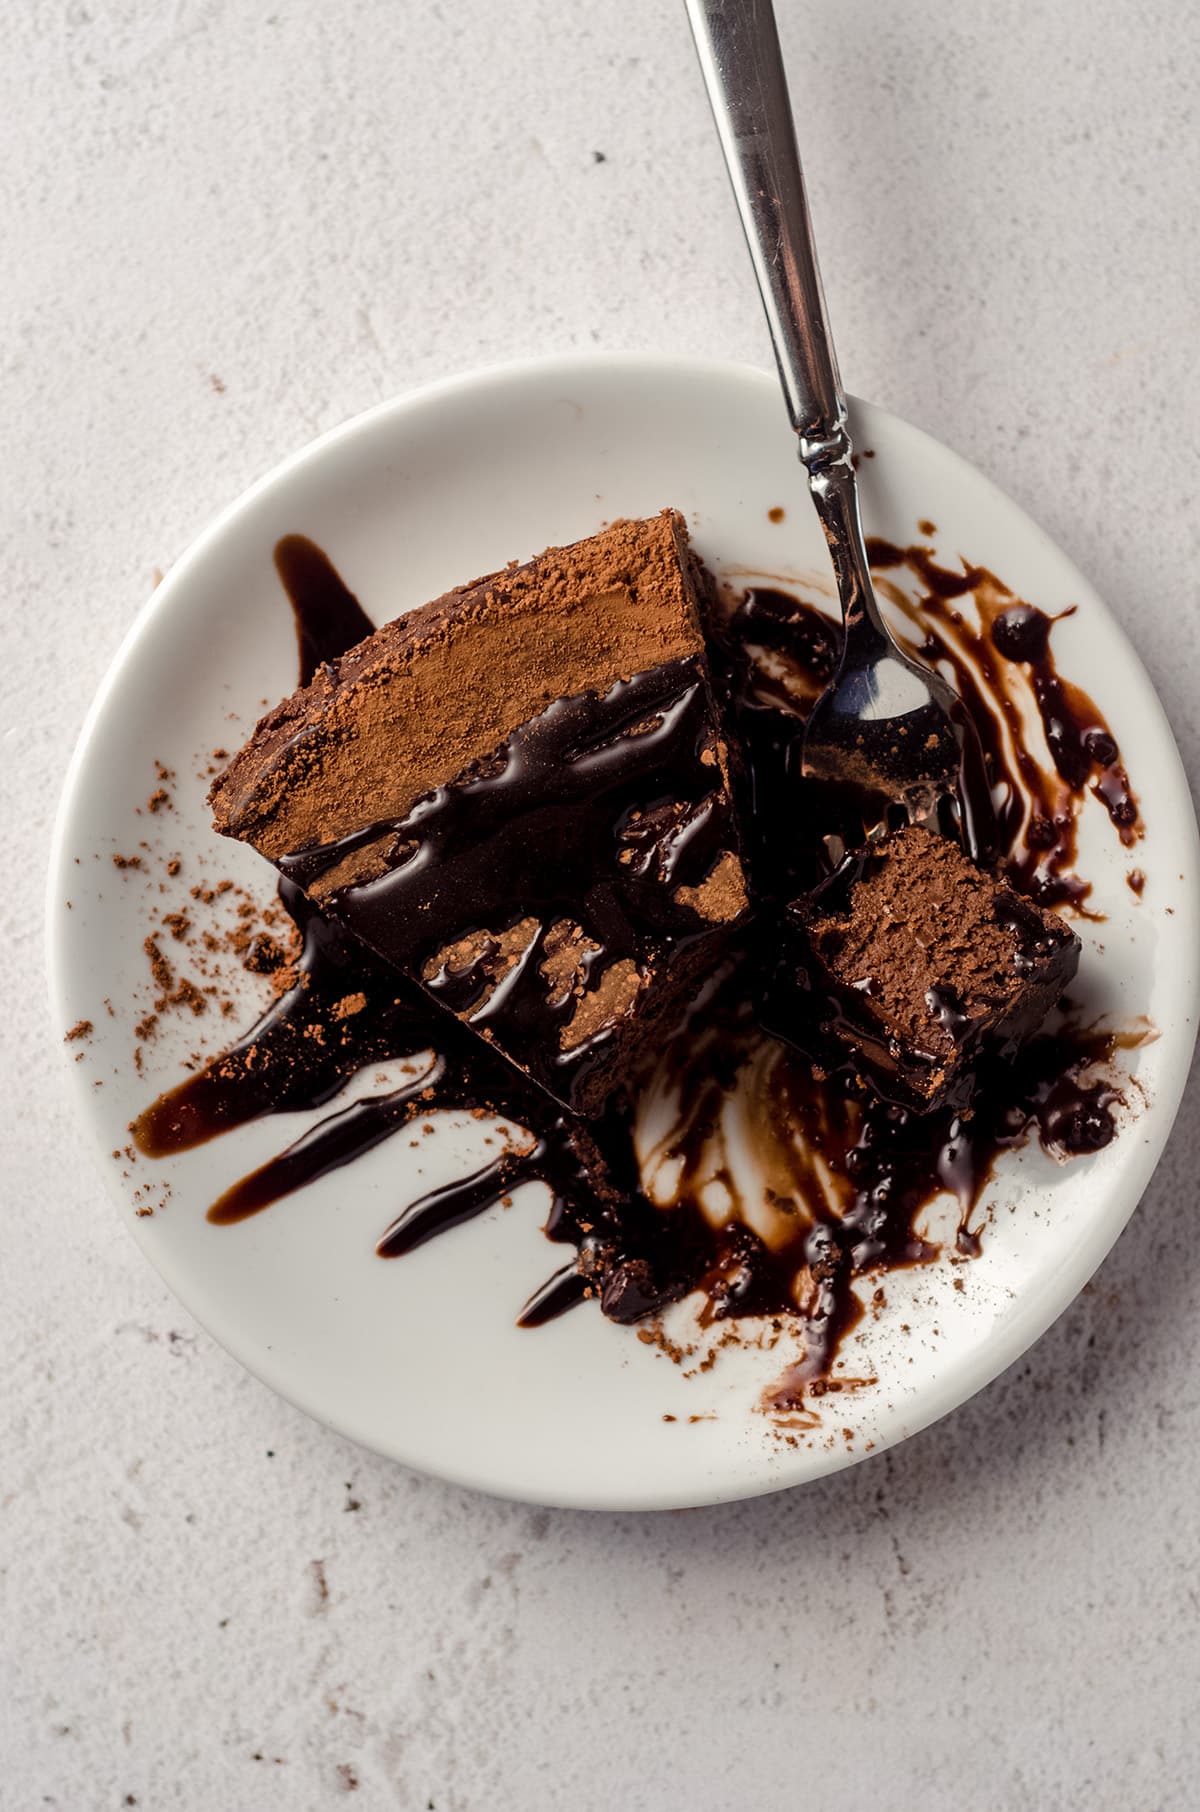 a slice of gluten free dairy free chocolate cake with chocolate syrup on it